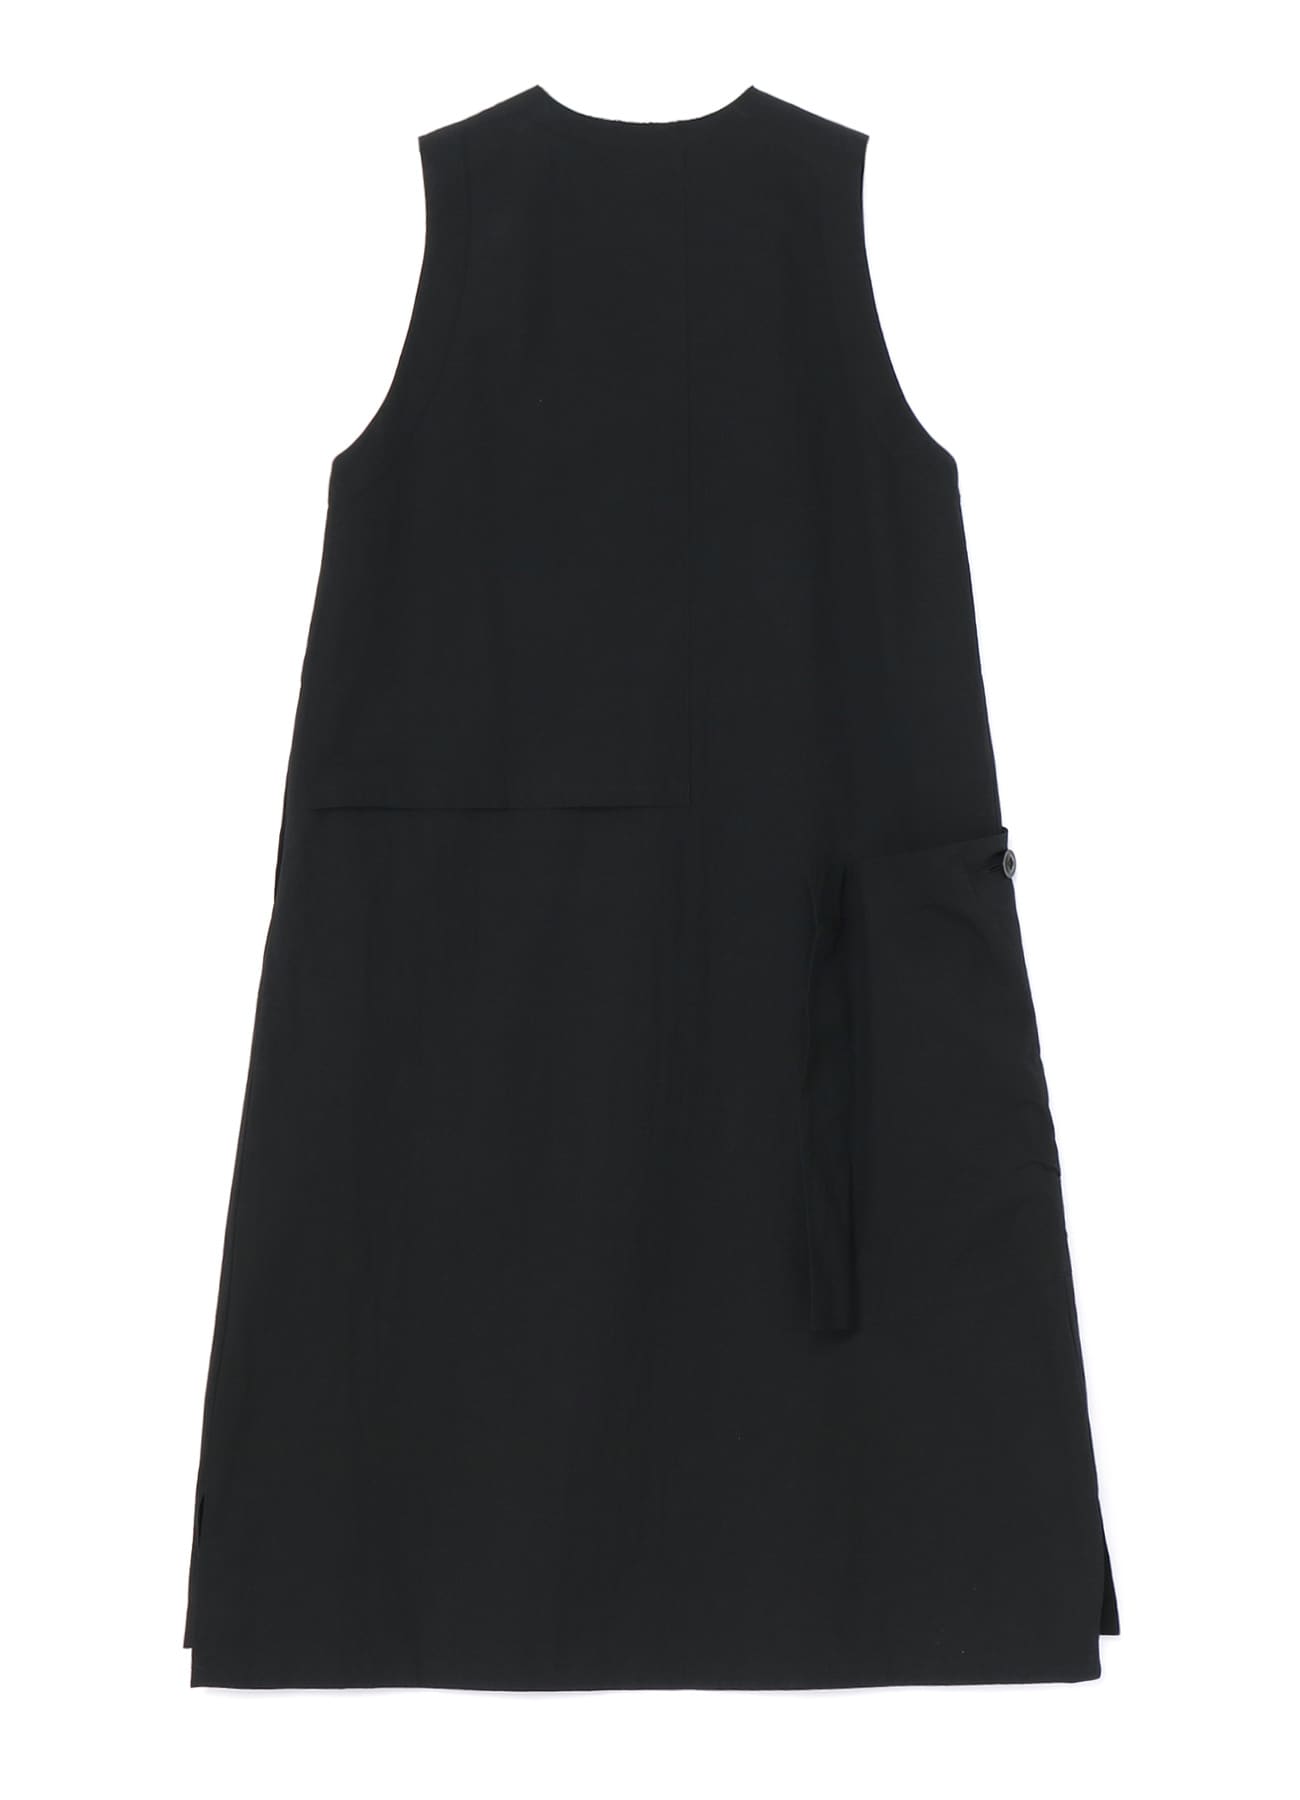 LIGHT TWILL COTTON PATCHED POCKET SLEEVEESS DRESS(XS Black): Y's 